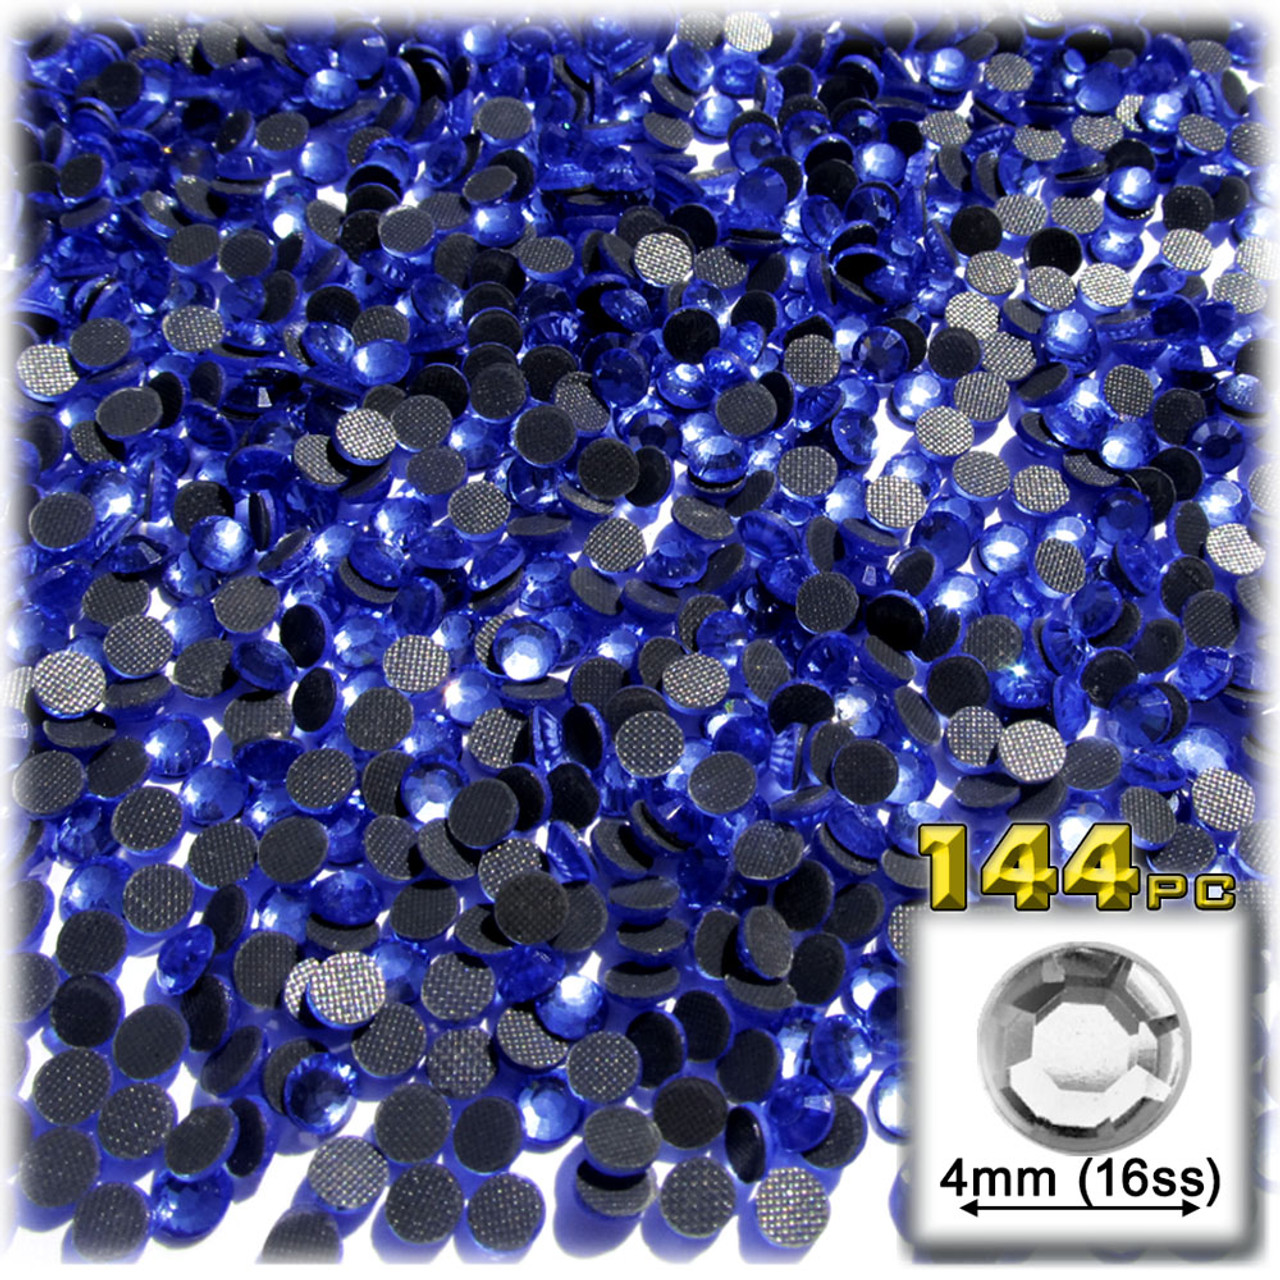 Hotfix Rhinestones Czech Quality 5mm (20ss) Navy Blue Color 10gross (1440  Pieces) Crystal Stud Crafts on Fabric, Clothes, Shoes, and Jeans Cristal De